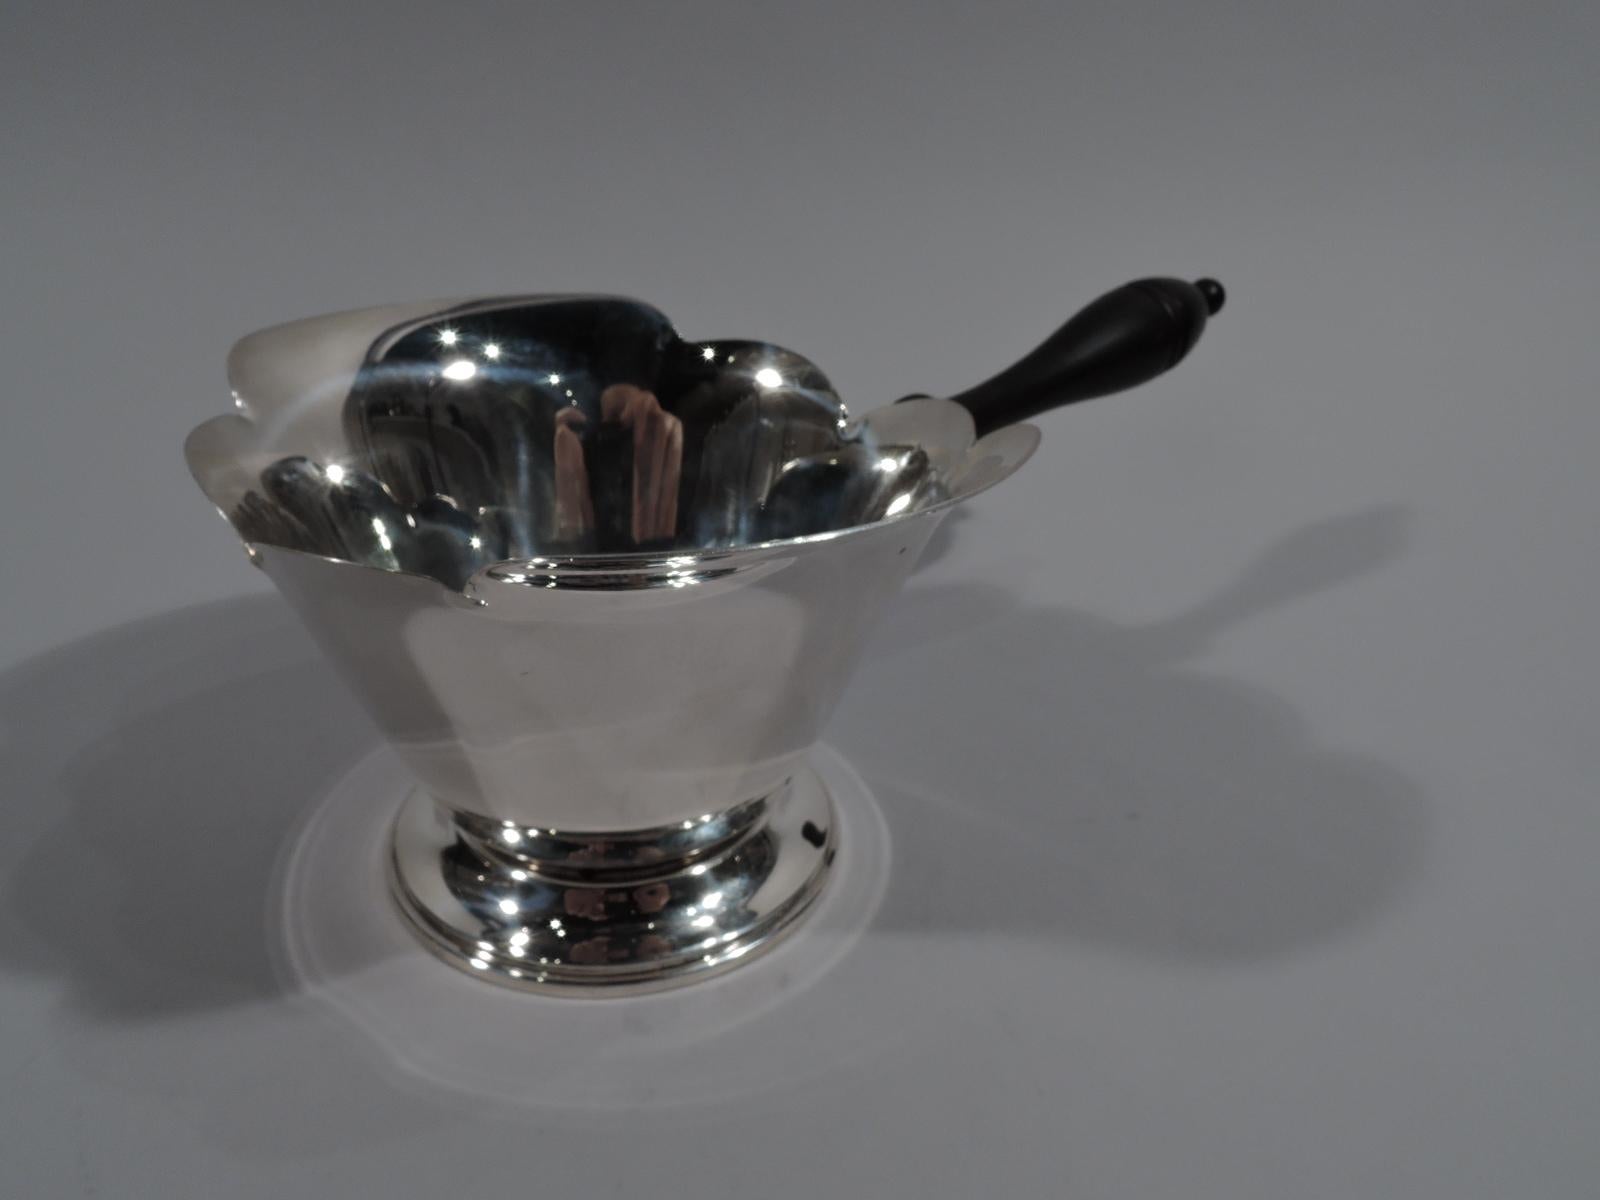 Large American Modern sterling silver pipkin. Conical bowl with scalloped rim and spread foot. Stained-wood baluster handle. Fully marked including maker’s stamp comprising letter A in triangle, and no. 403. 

Overall dimensions: H 3 1/2 x W 10 x